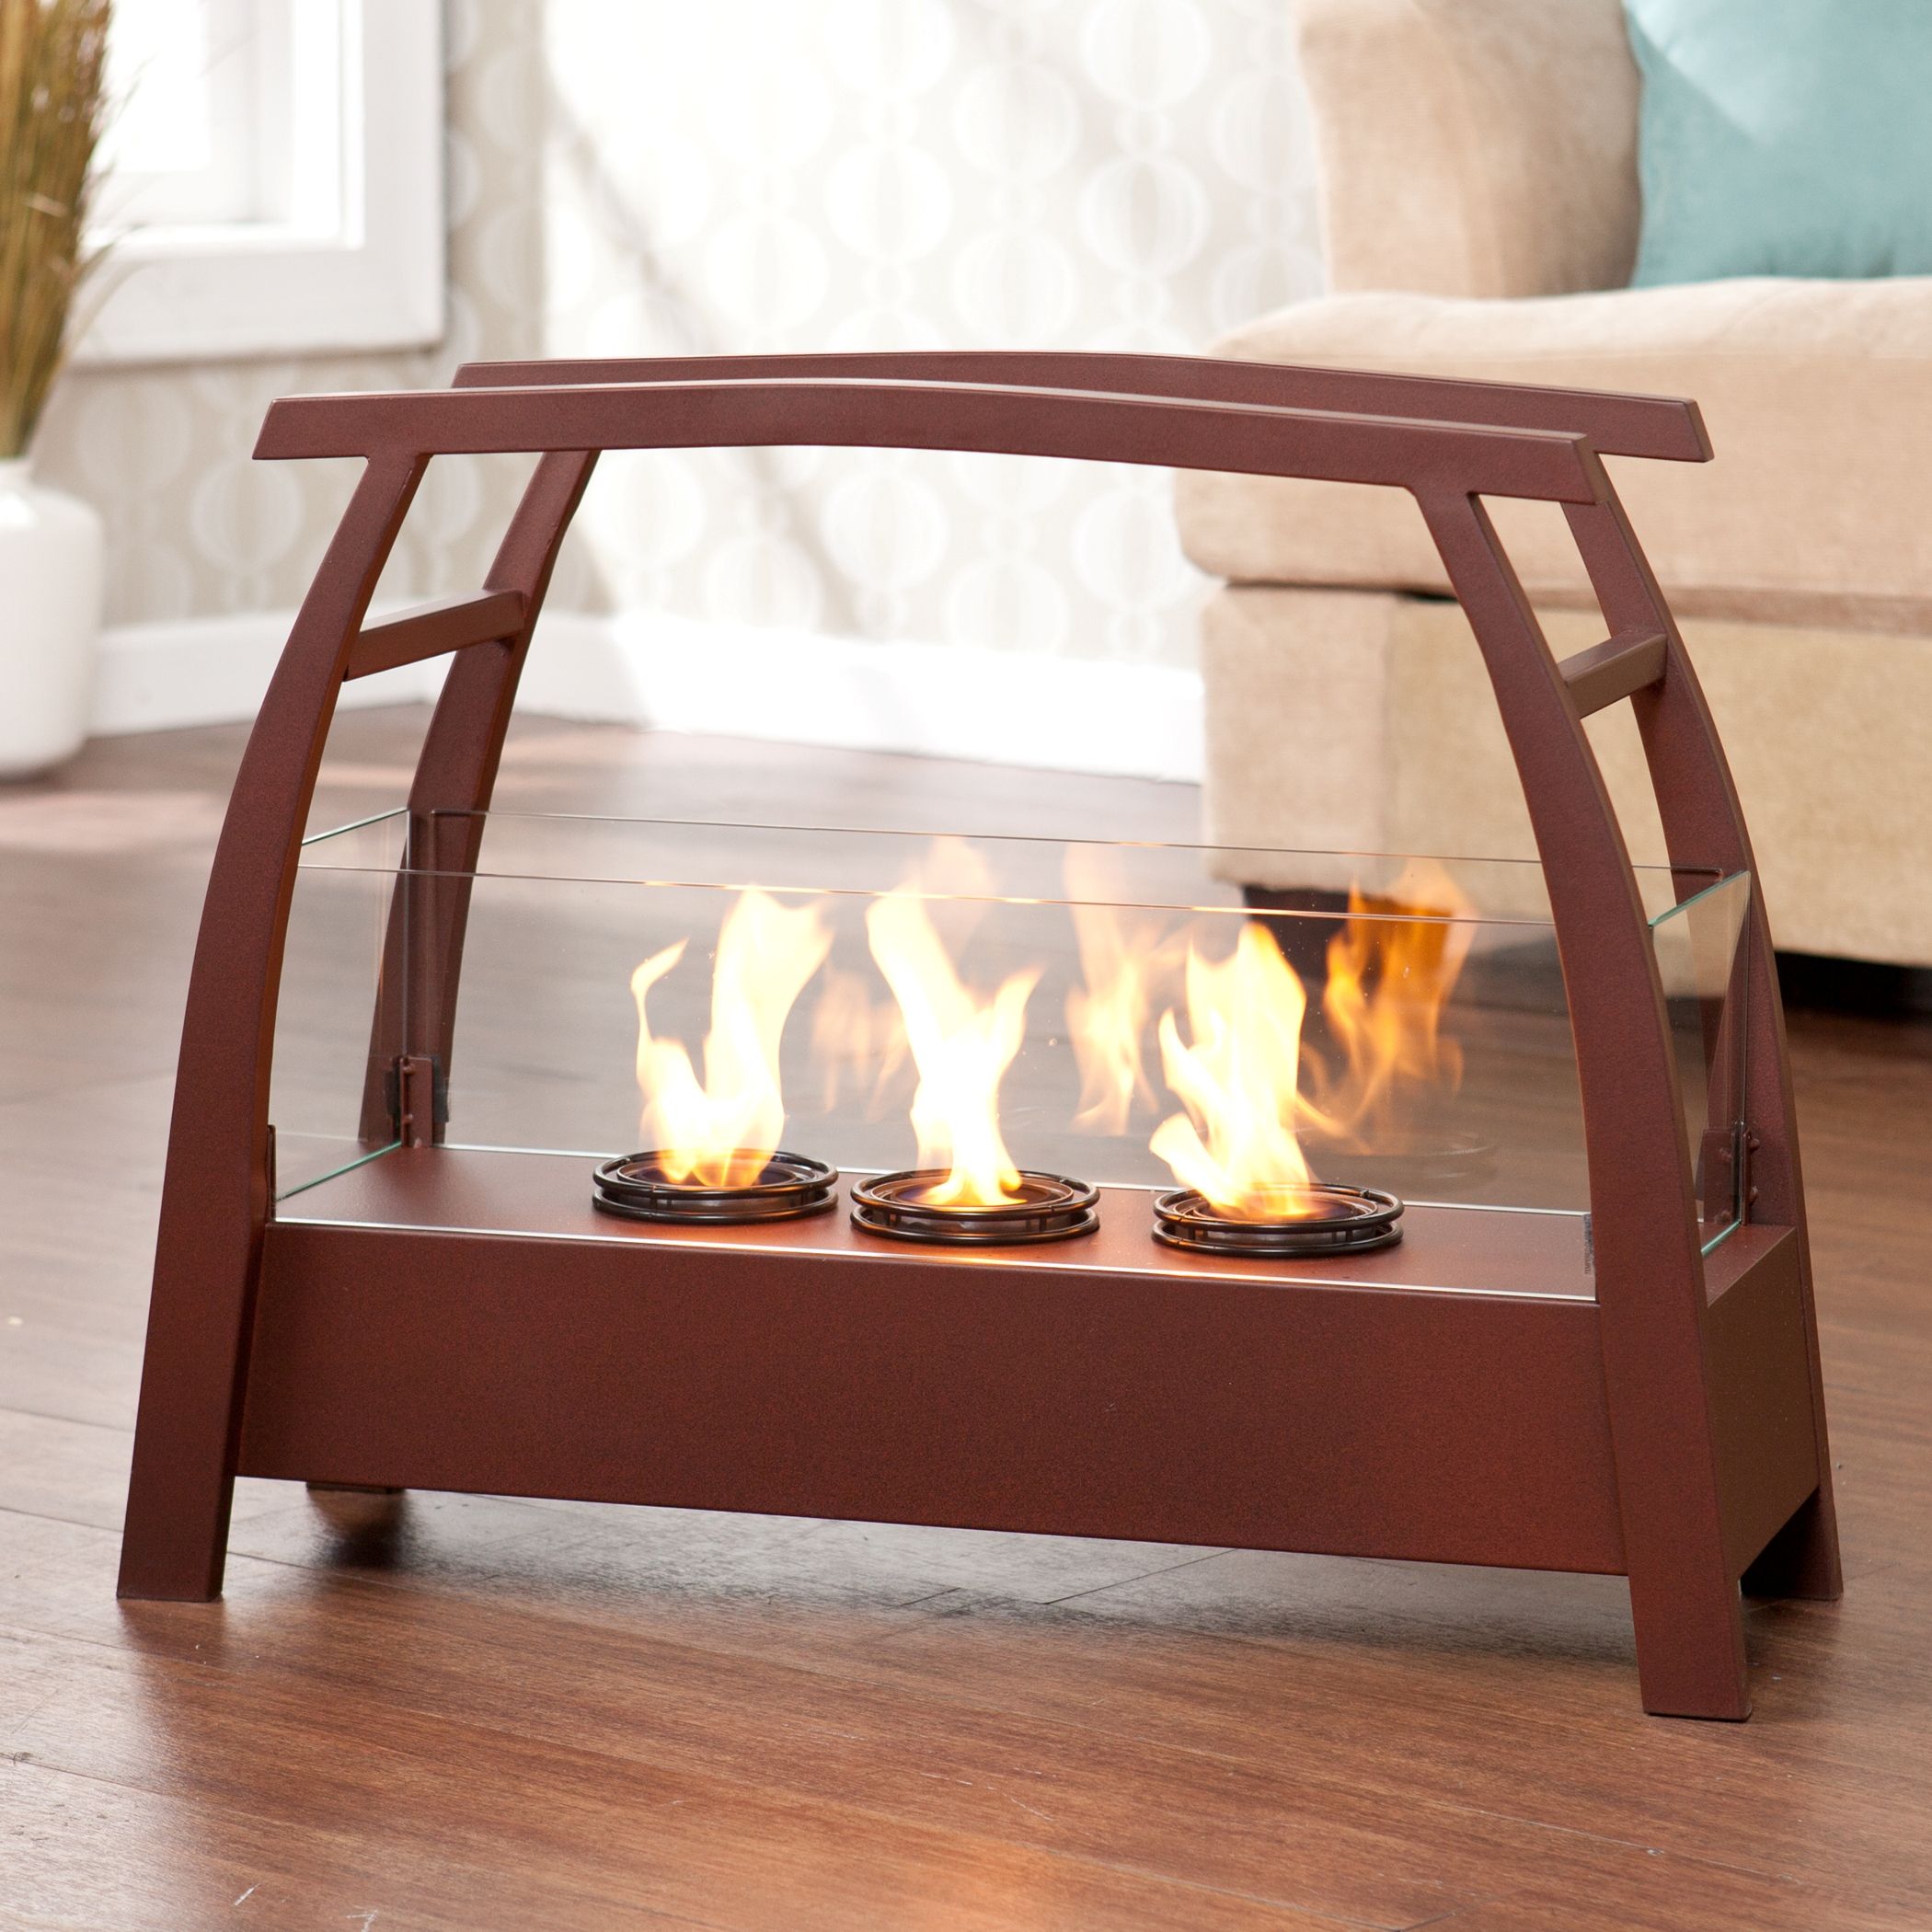 Portable Tabletop Fireplace Awesome Portable Indoor Fireplace Charming Fireplace